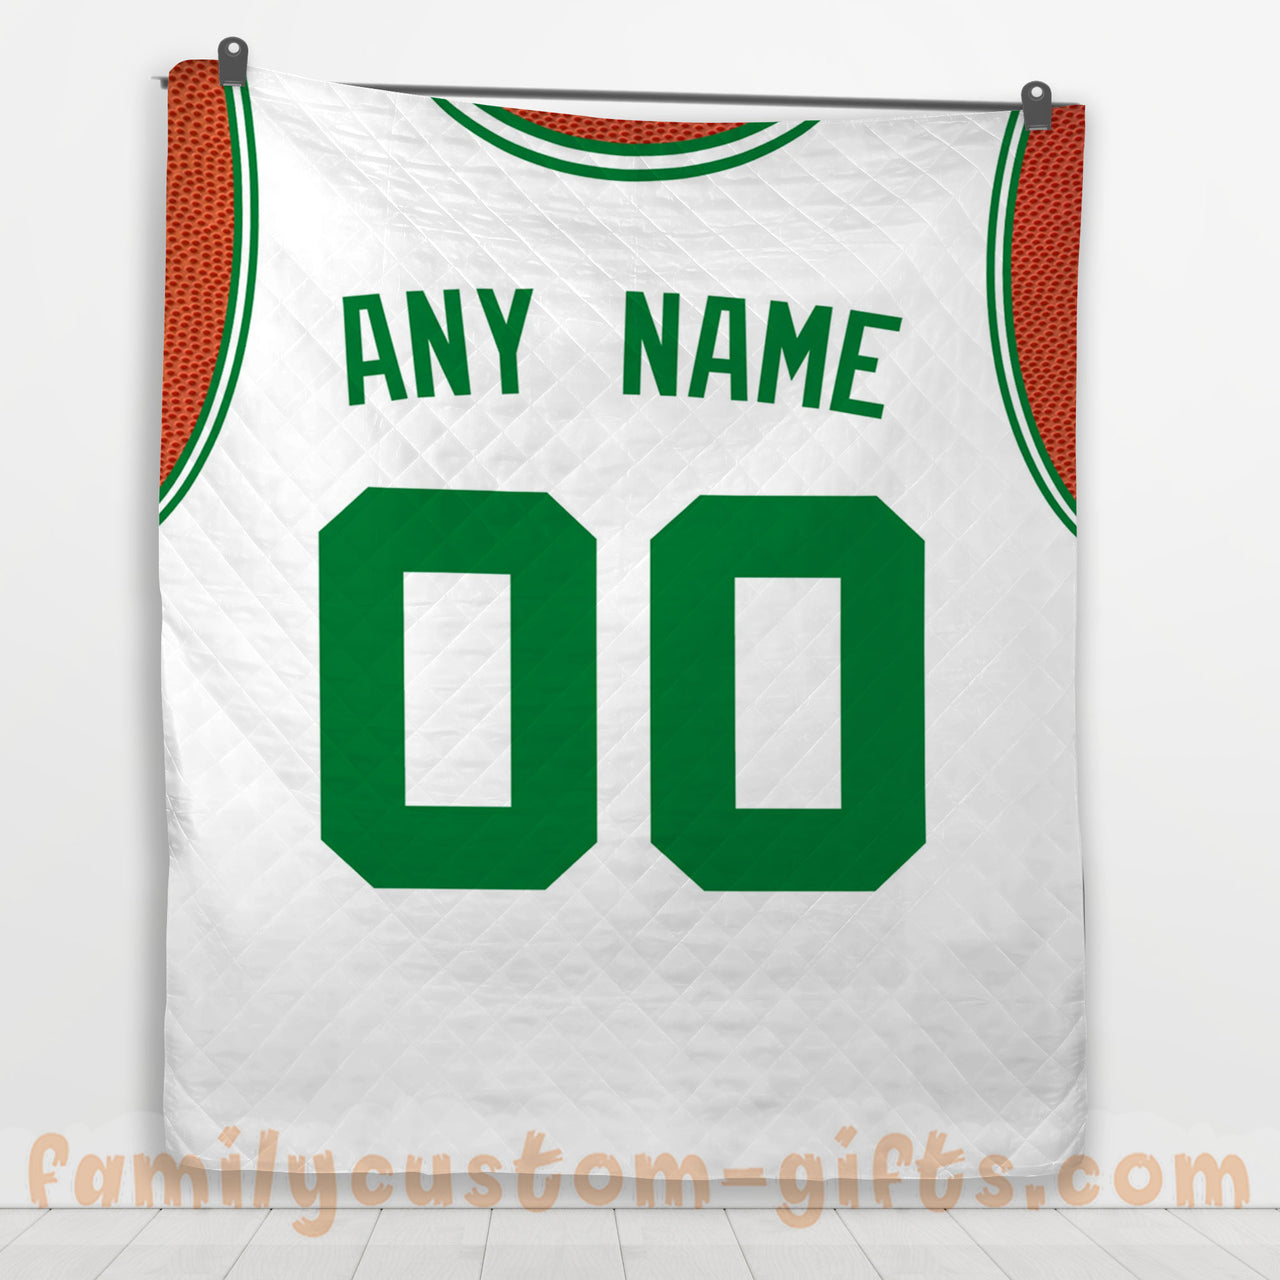 Custom Premium Quilt Blanket Boston Jersey Basketball Personalized Quilt Gifts for Her & Him